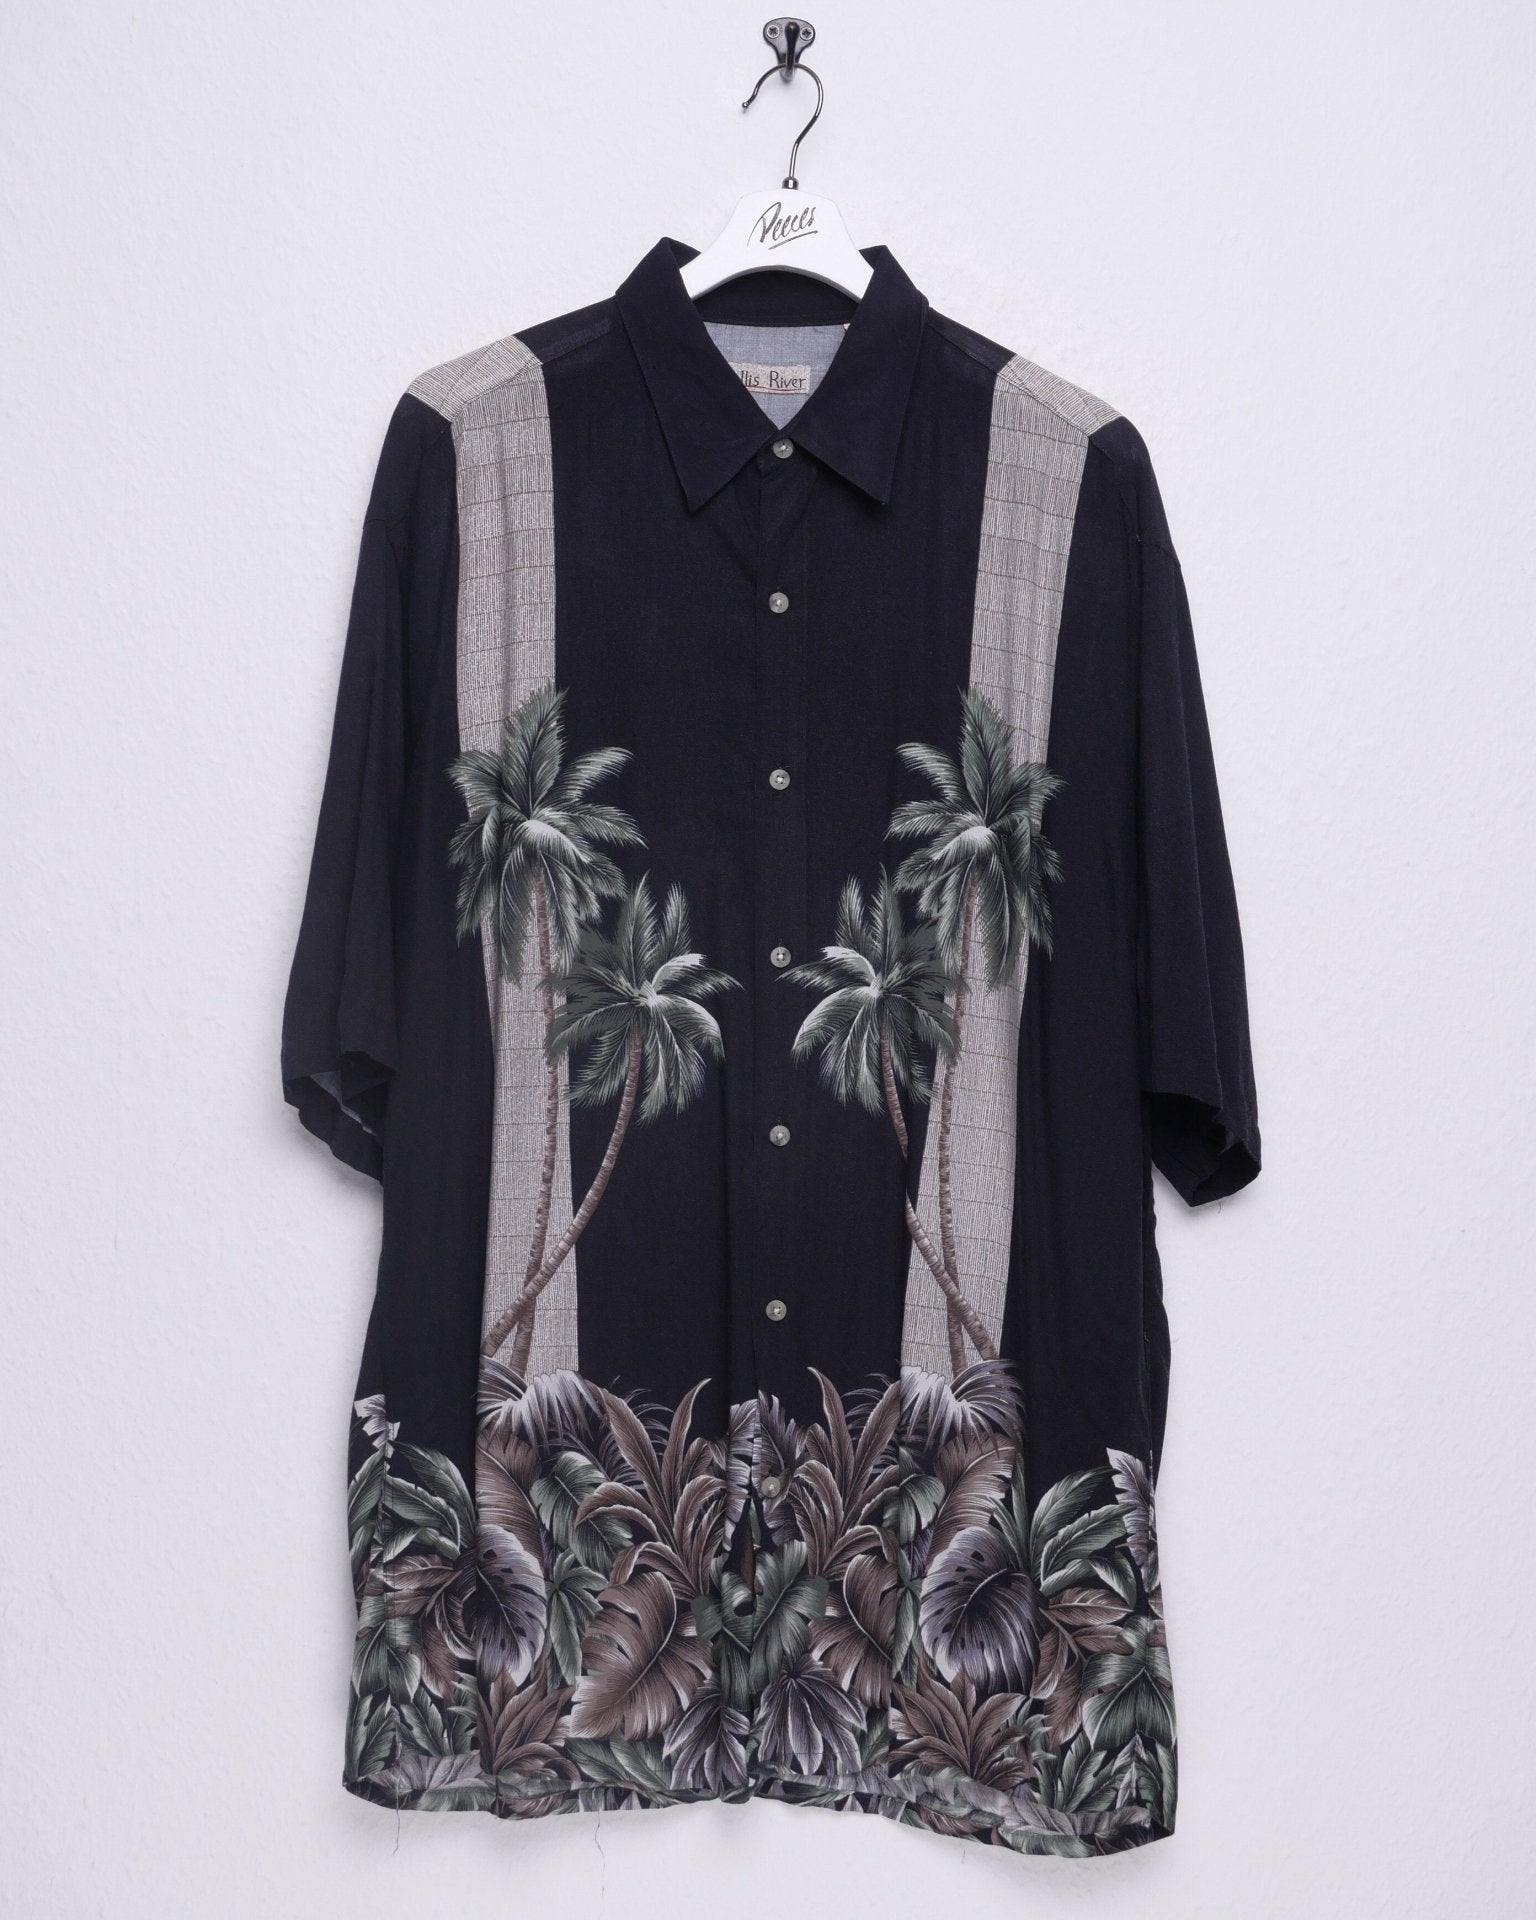 'Palm Trees' printed Pattern multicolored S/S Hemd - Peeces